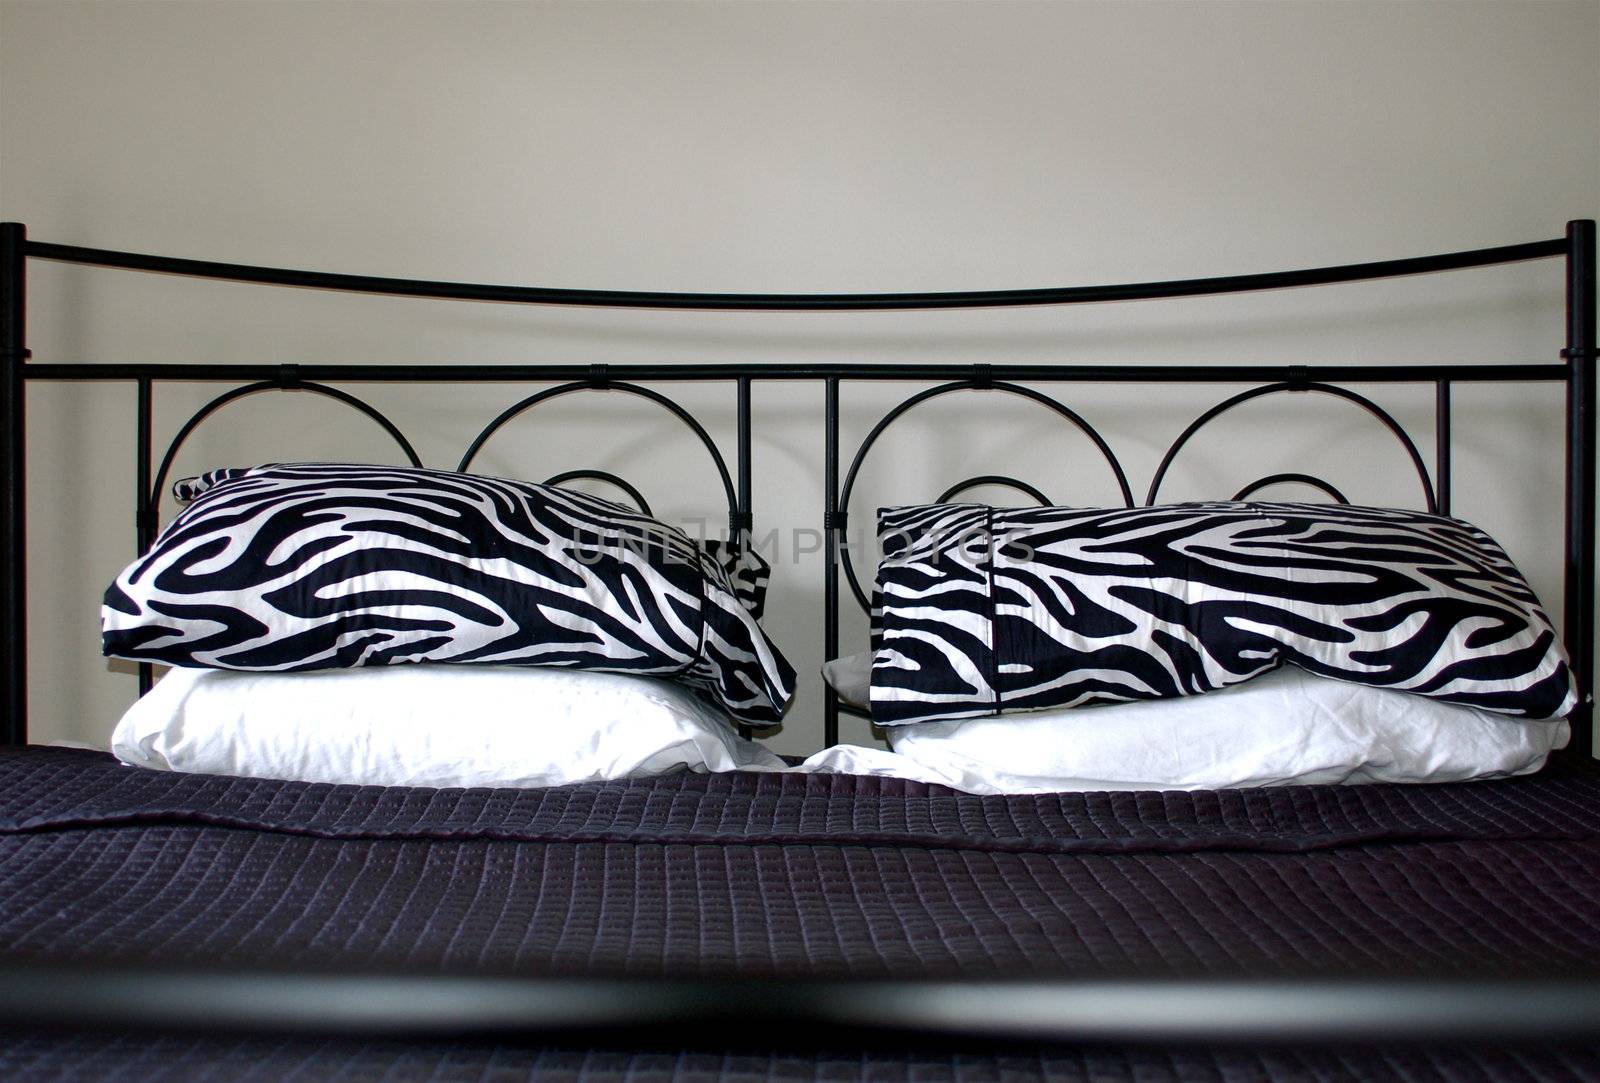 View from foot of the bed showing length of bed up towards the iron headboard and pillows, with black and white zebra stripes and black silky cover.